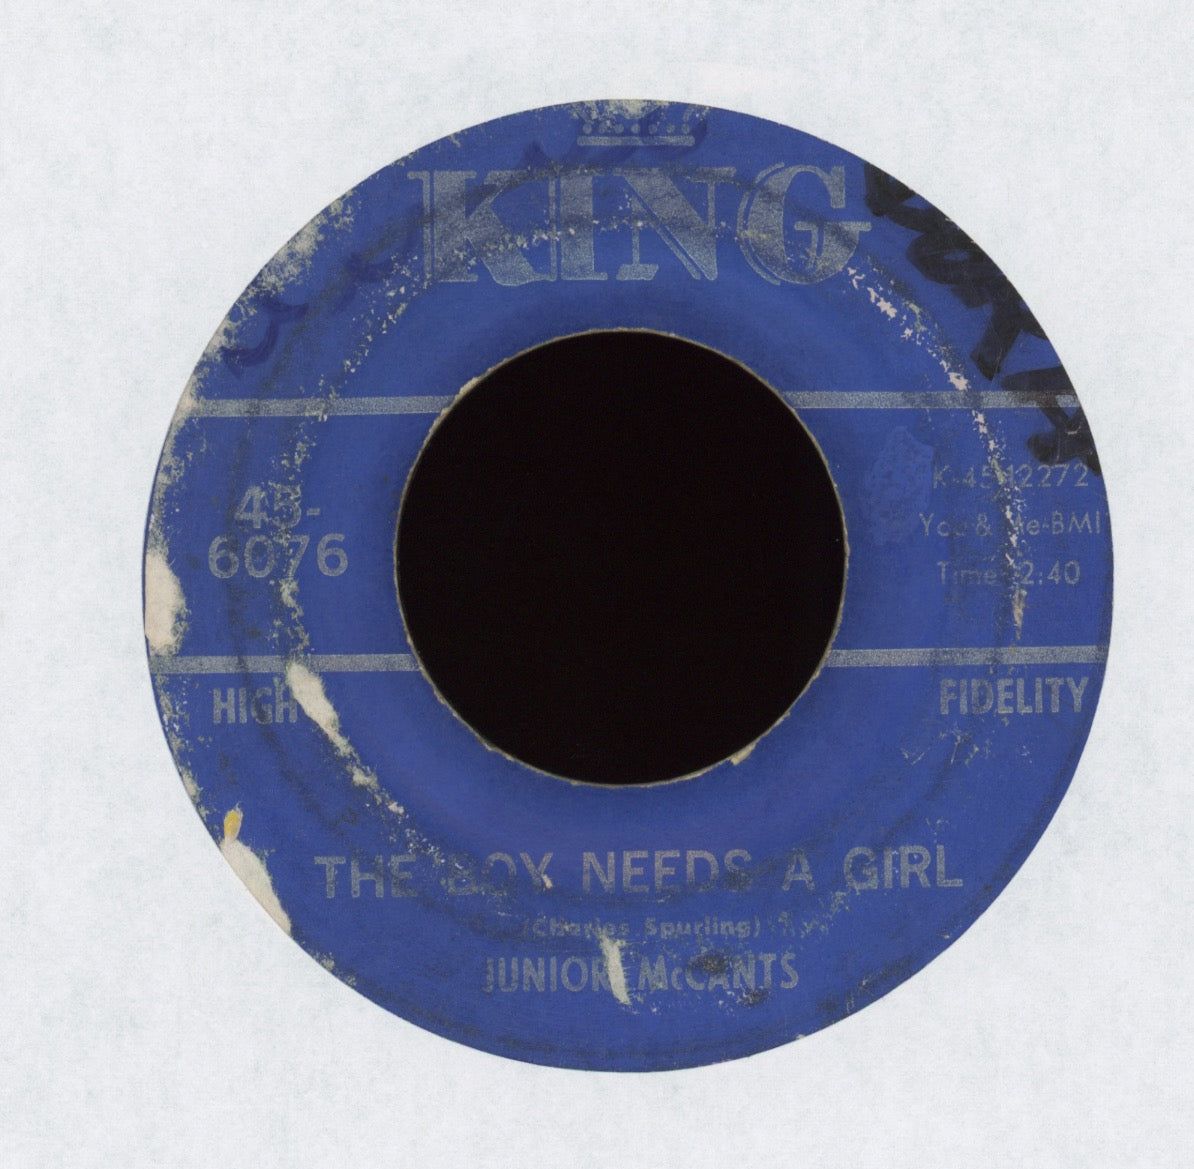 Junior McCants - The Boy Needs A Girl on King Northern Soul 45